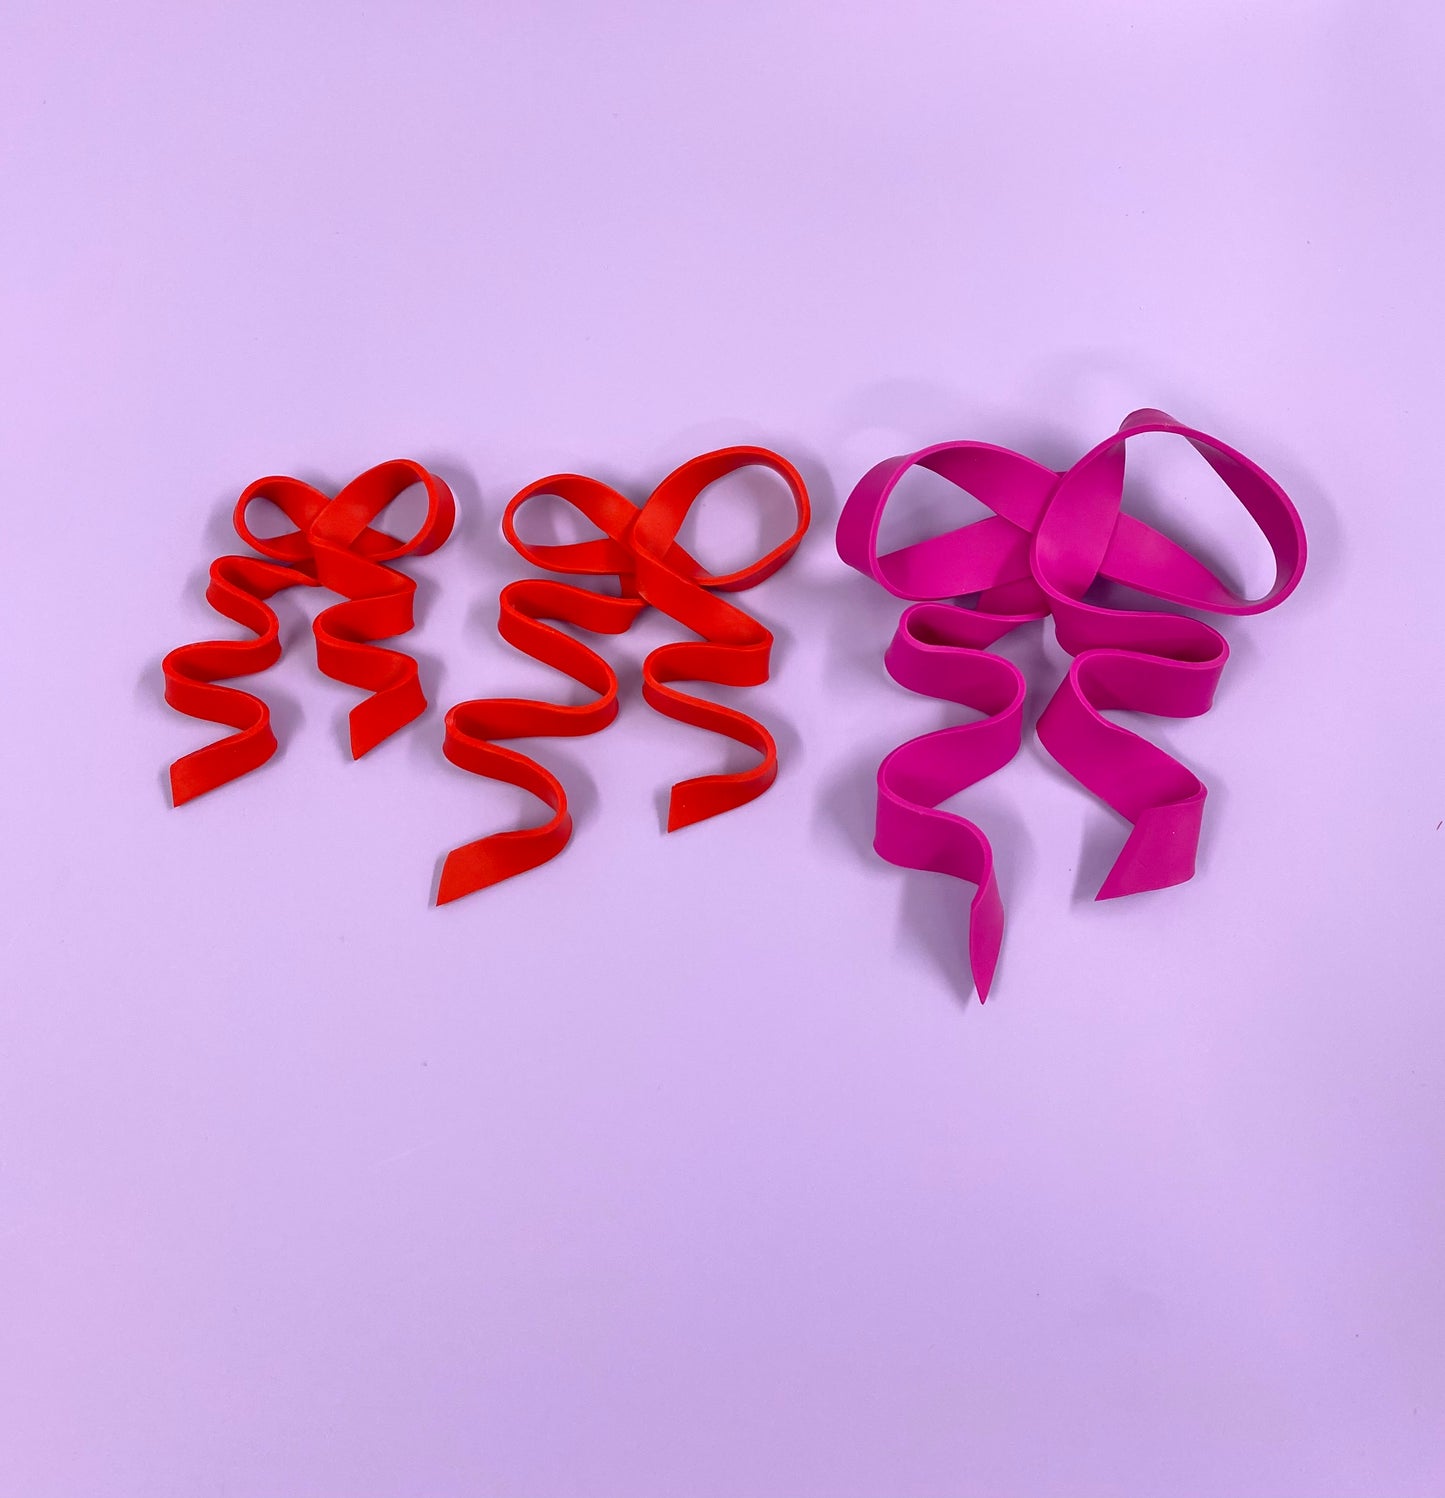 RESTOCK SOON- Ruffled Bow (Made in the color of your choice)